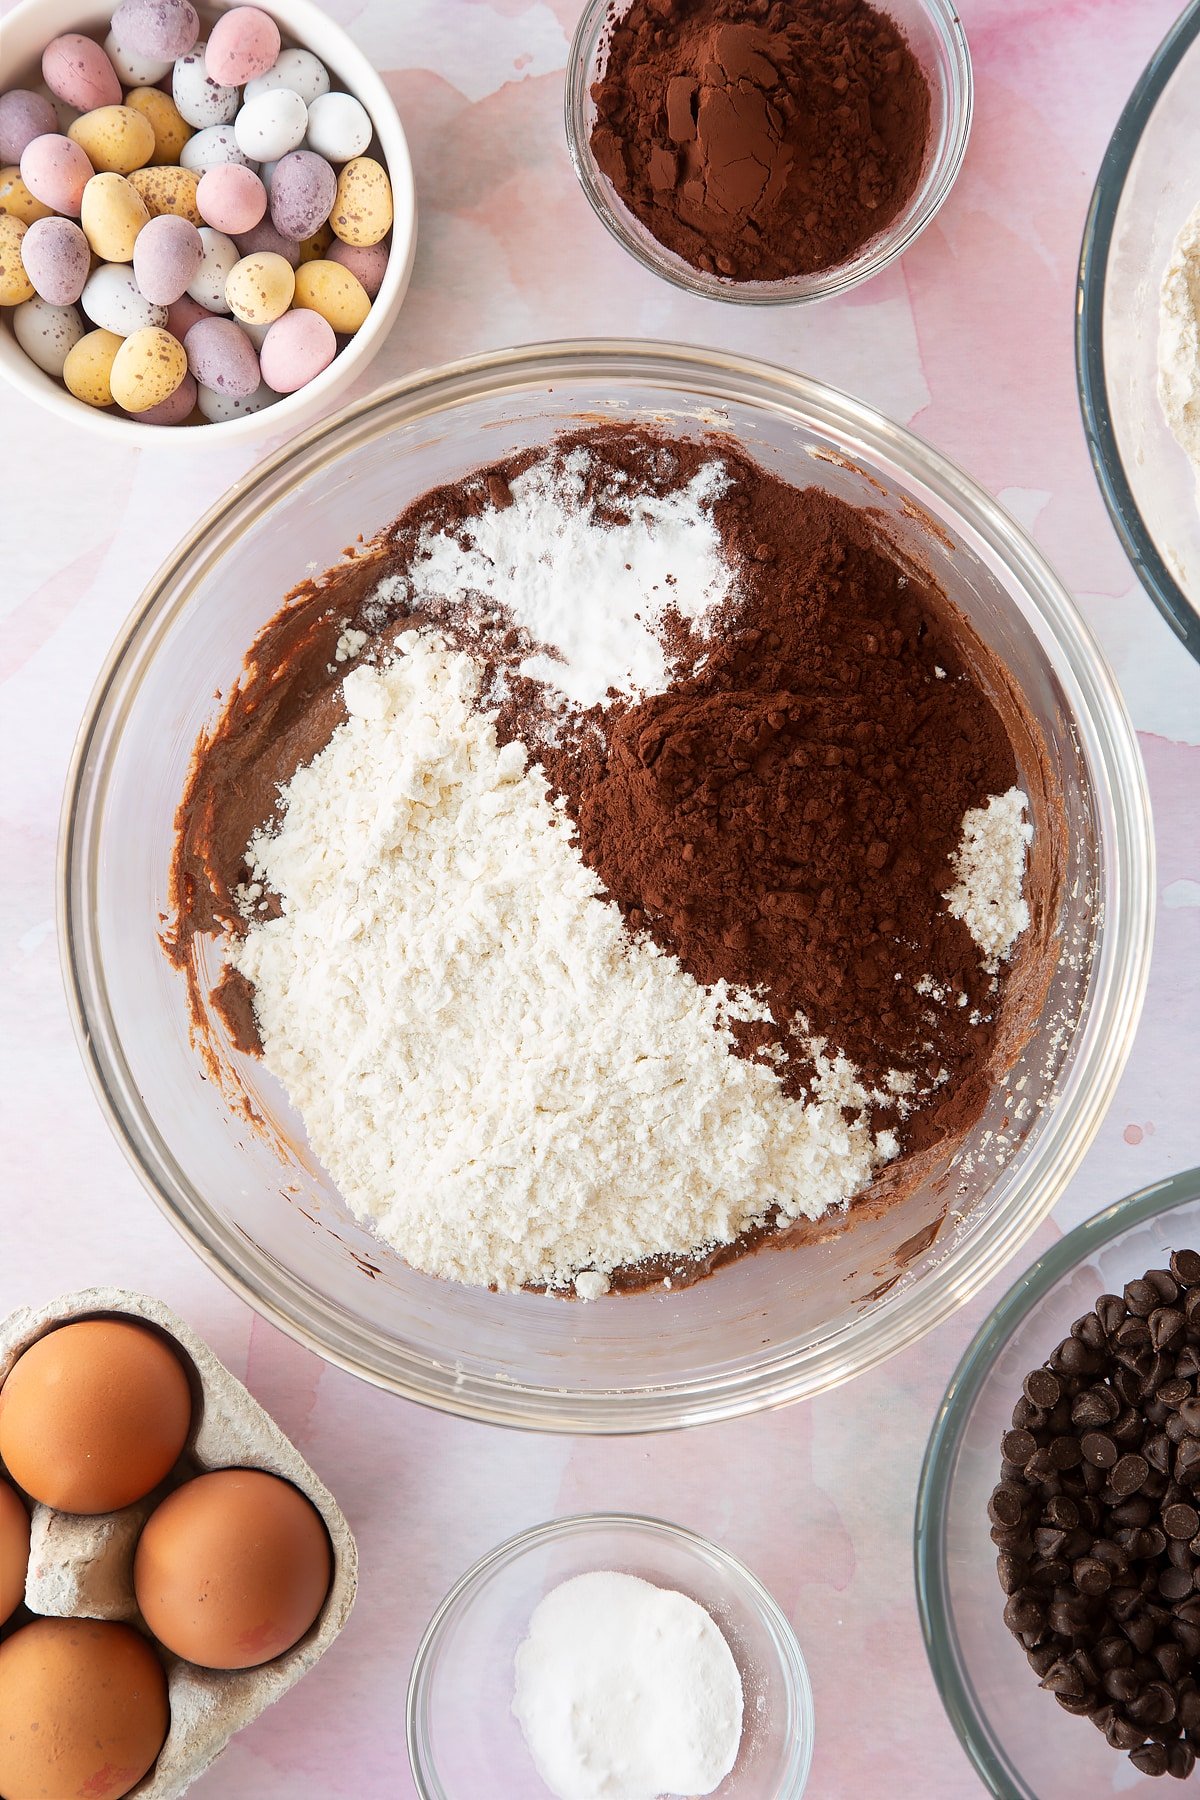 Butter, sugar, egg and dark chocolate beaten together in a bowl with flour and cocoa on top. Ingredients to make Chocolate Easter cookies surround the bowl.